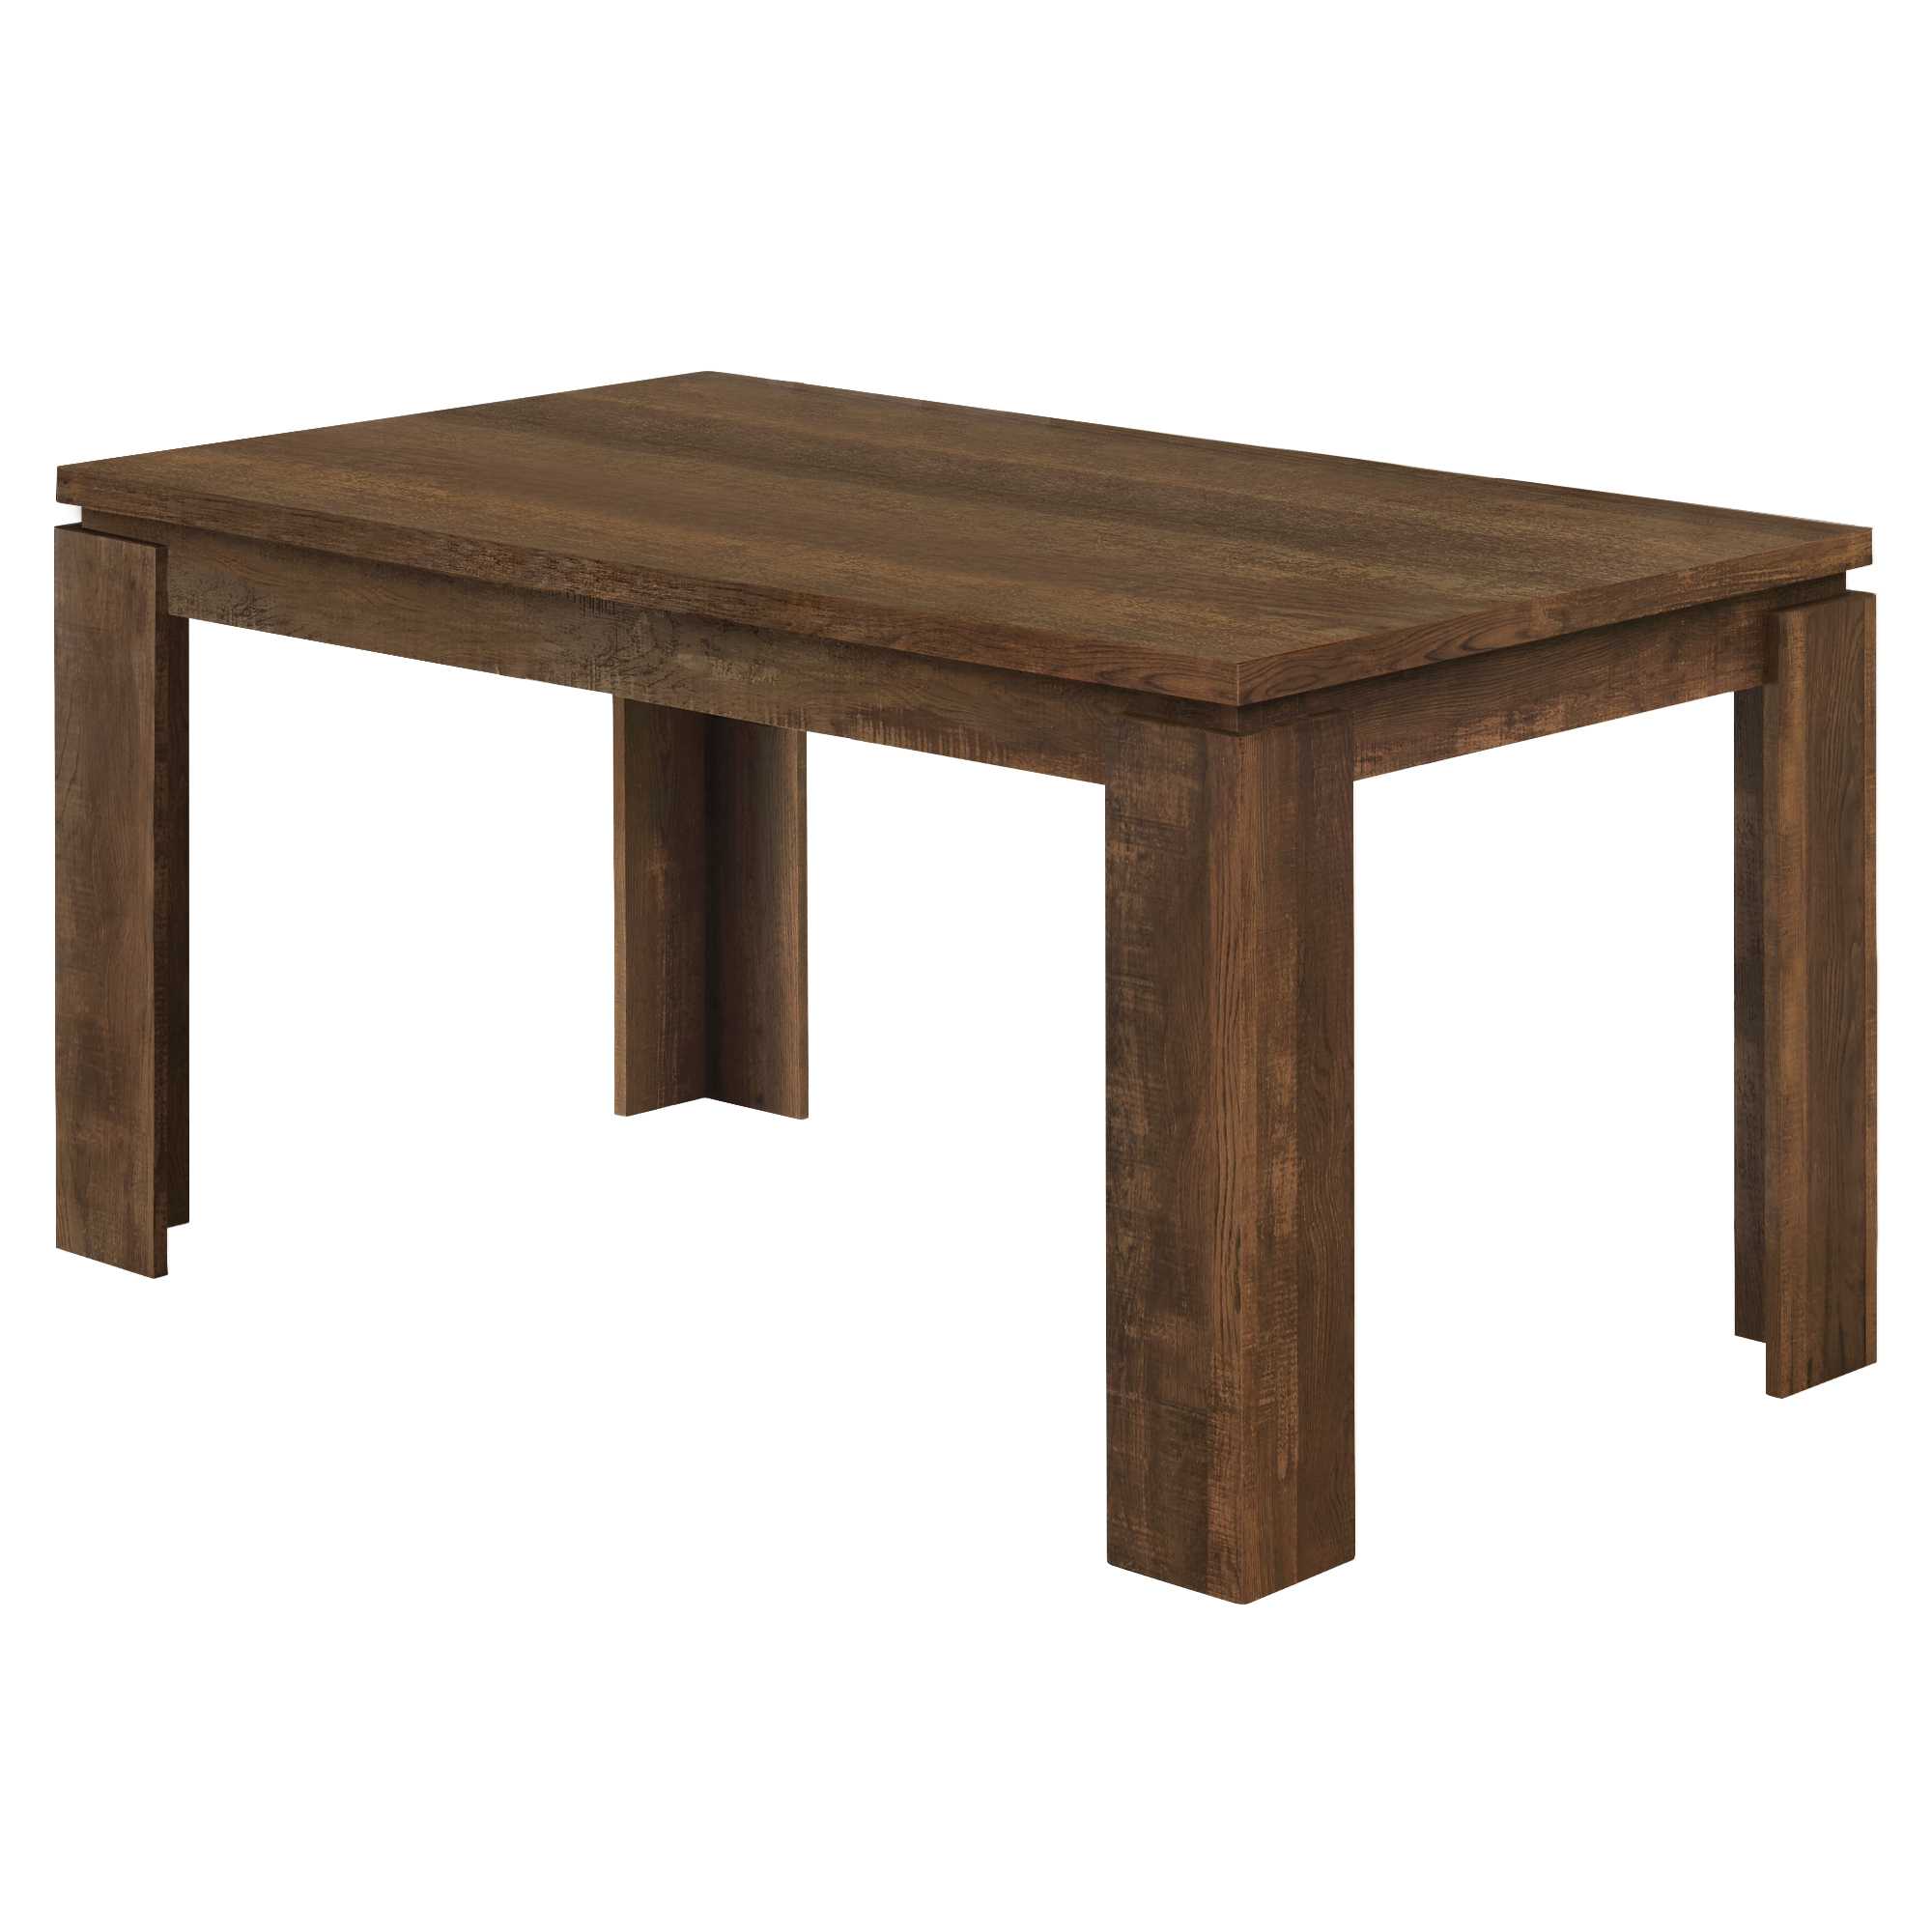 35.5" x 59" x 30.5" Brown Reclaimed Wood Look Dining Table